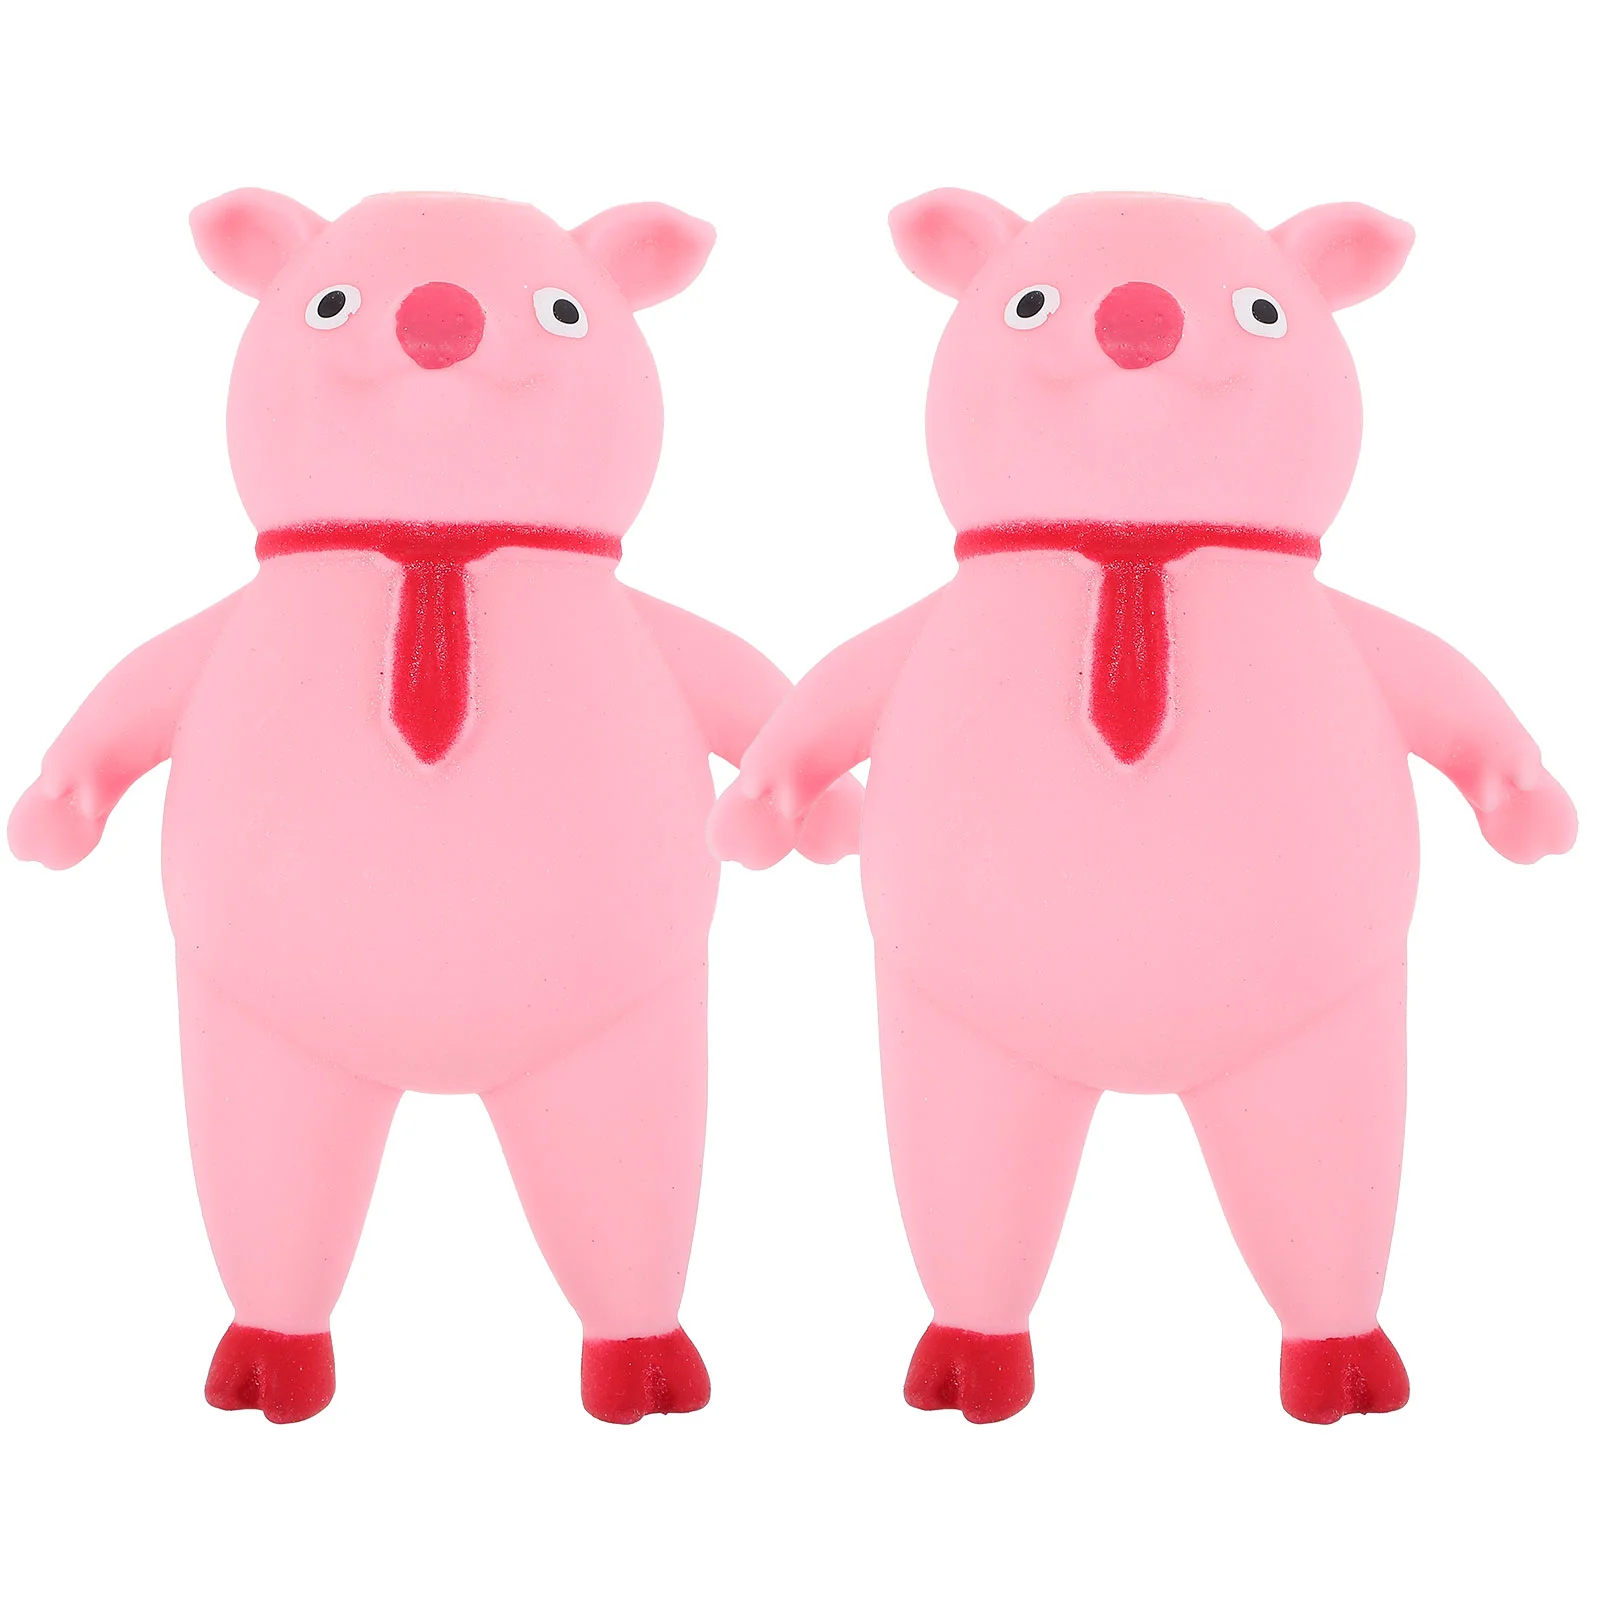 

2 Pcs Lovely Stress Toy Cartoon Squeeze Toys Sensory Supple Stretchy Funny Reliever Pigs